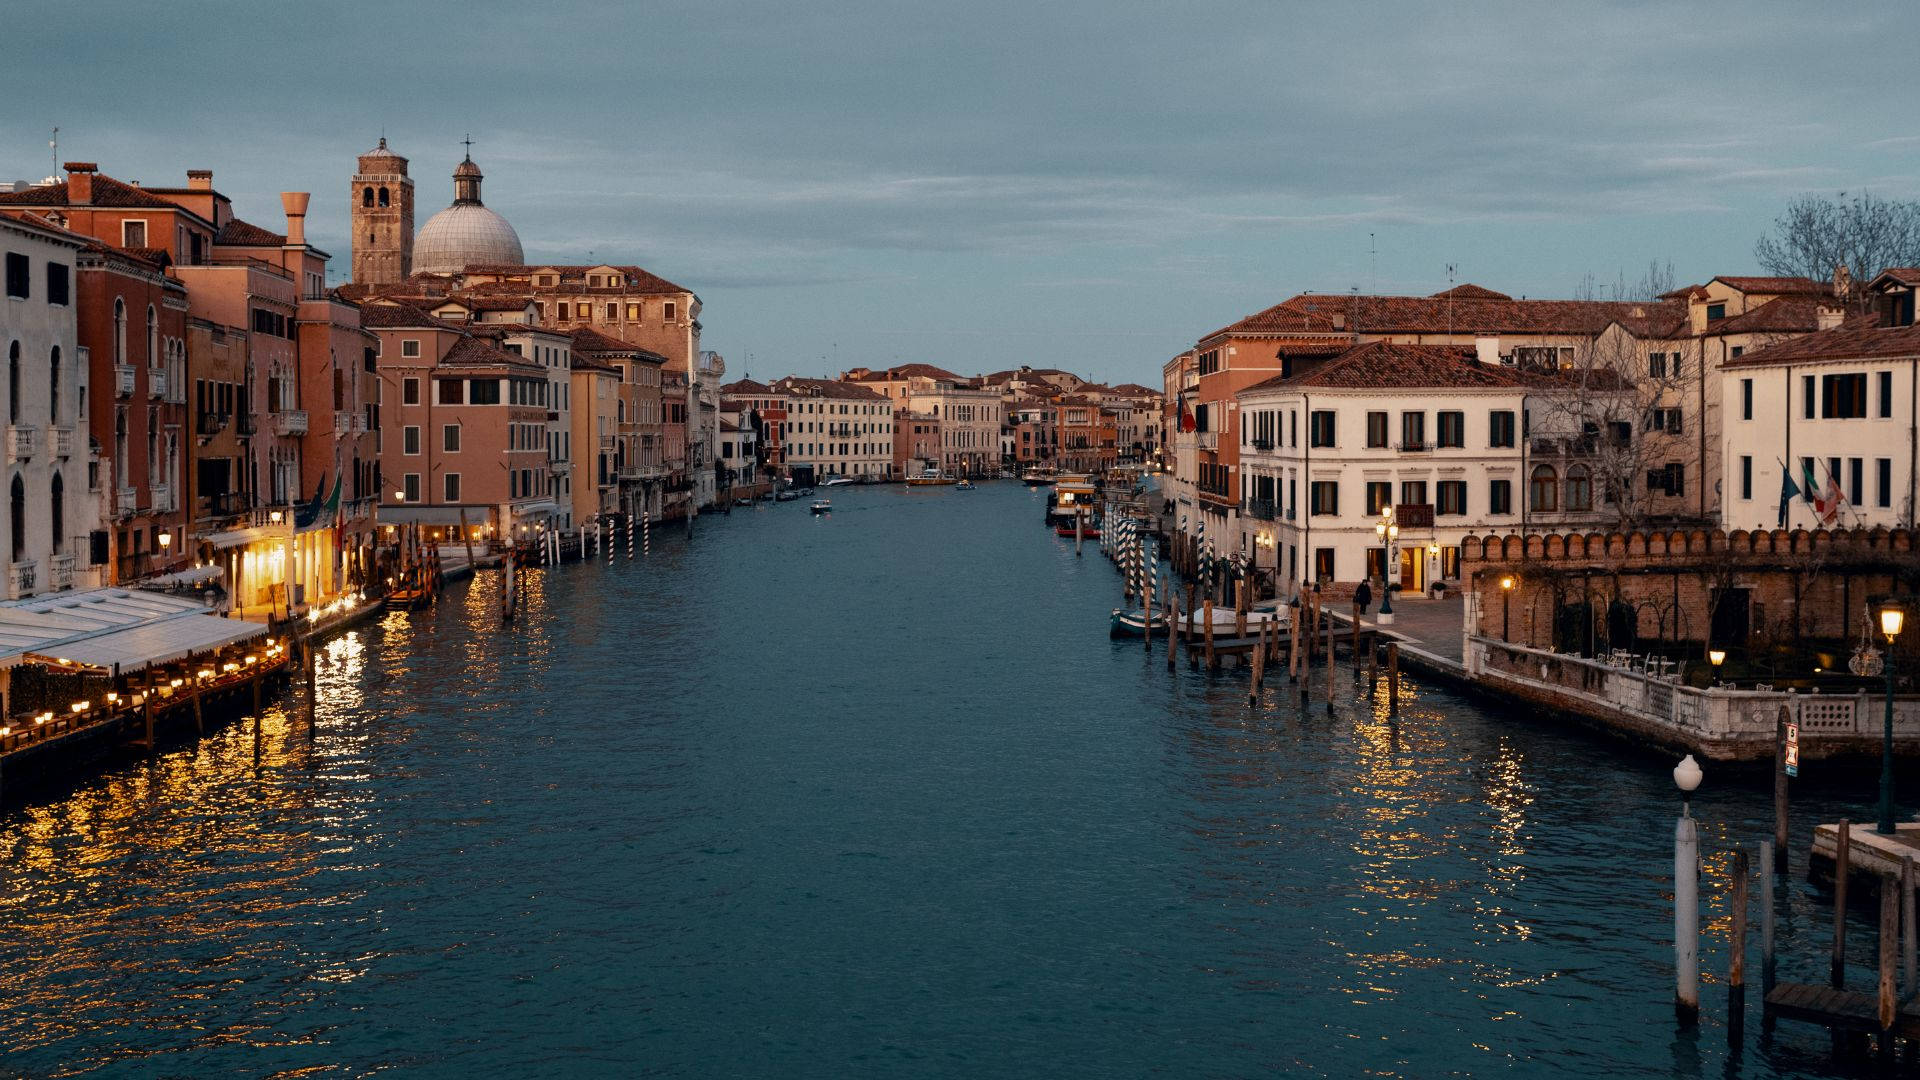 The Grand Canal Picture